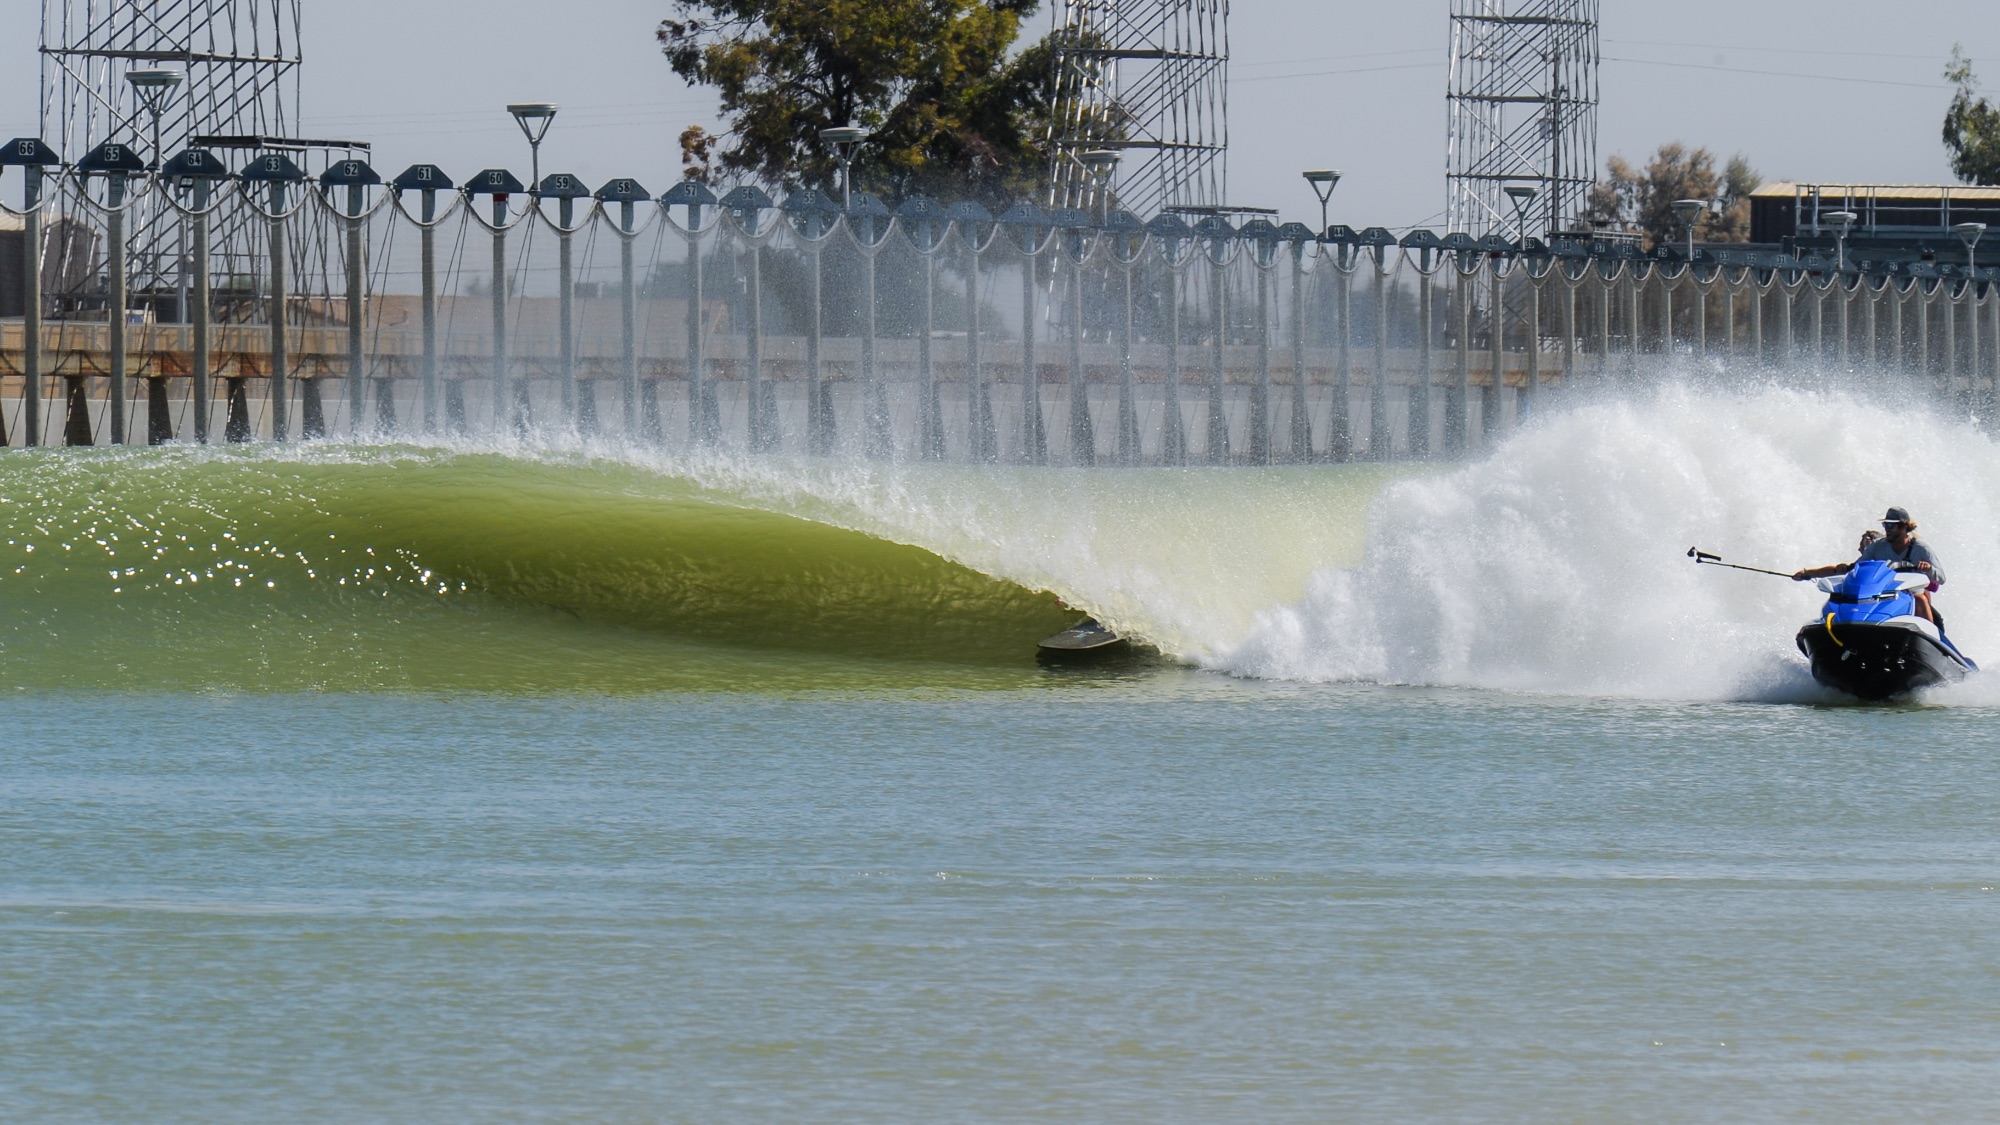 This is how the kelly slater wave pool works